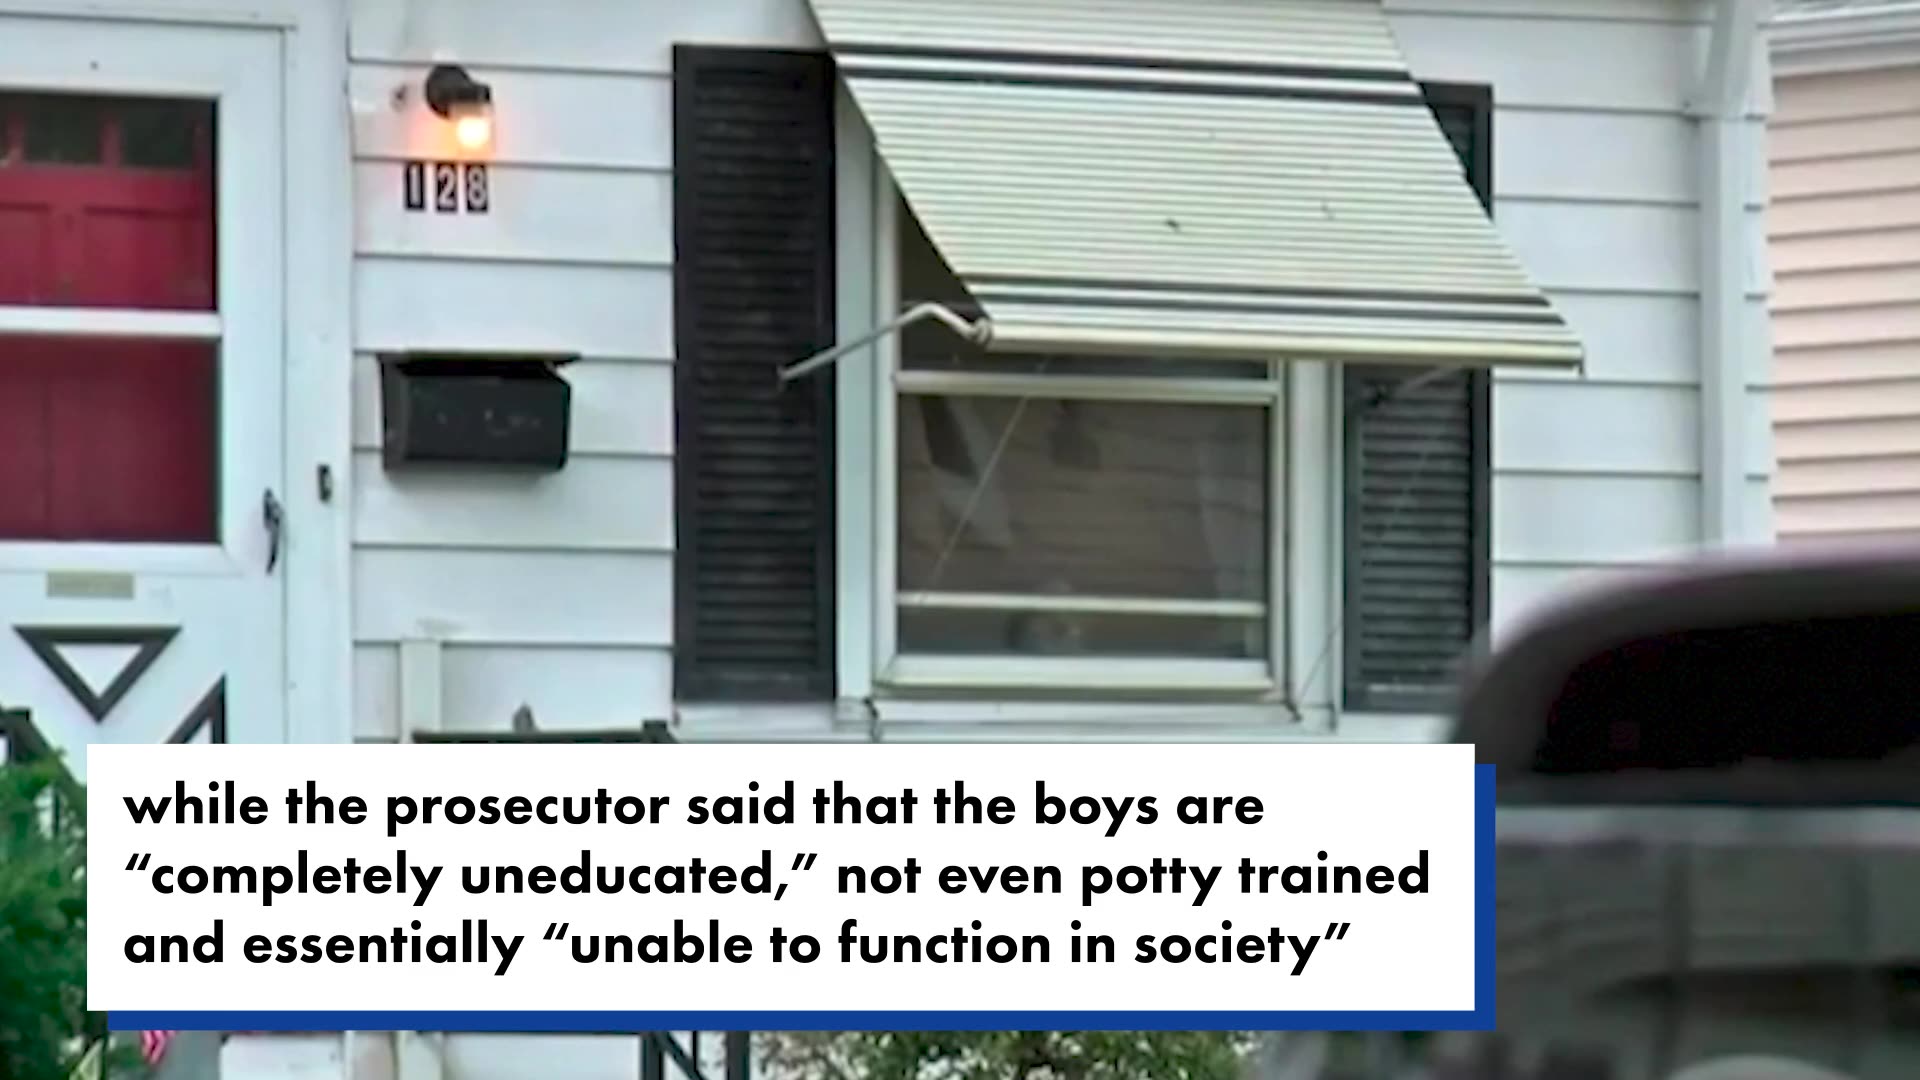 Like a 'horror movie': Naked boys who escaped feces-covered home looked like 'cavemen' who'd 'never seen the sun before': affidavit"